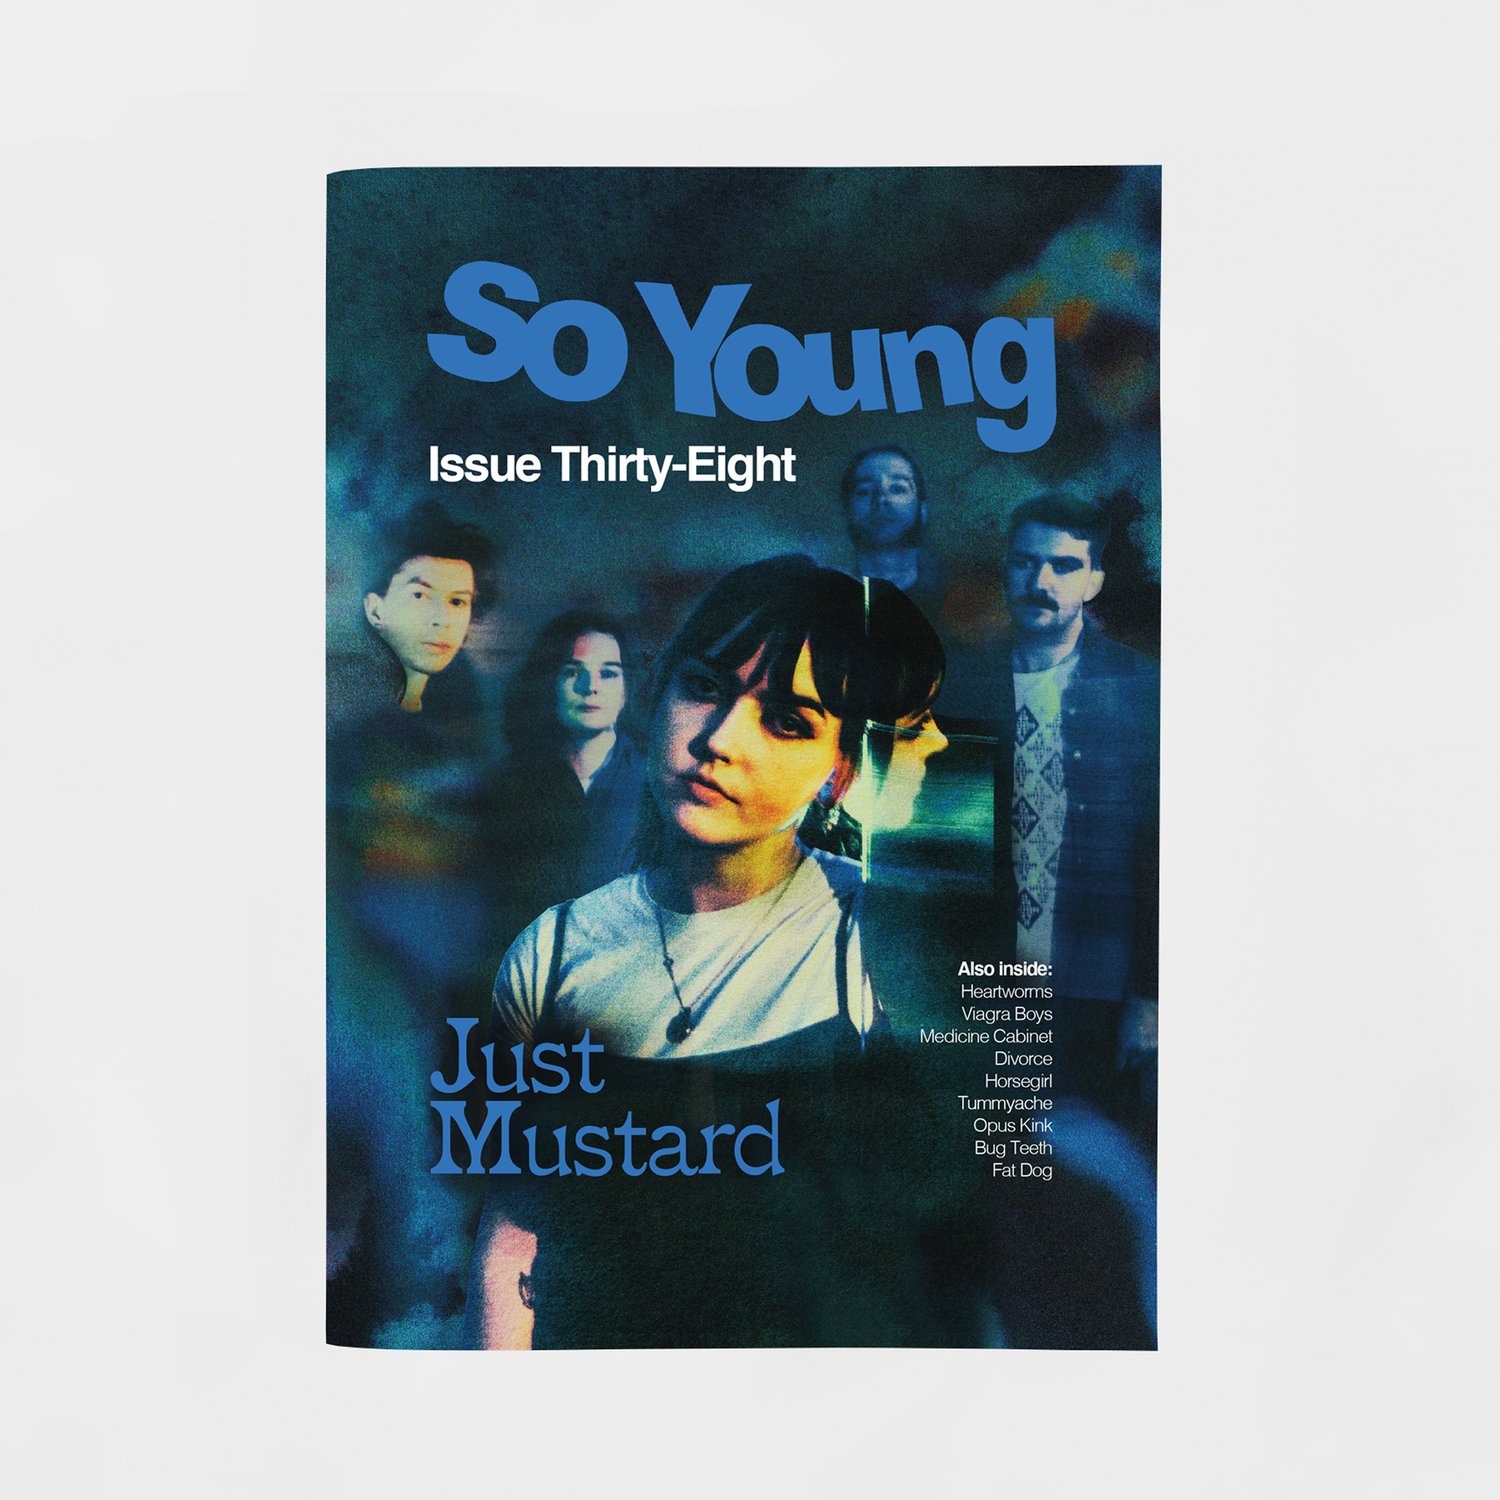 Image of So Young Issue Thirty-Eight